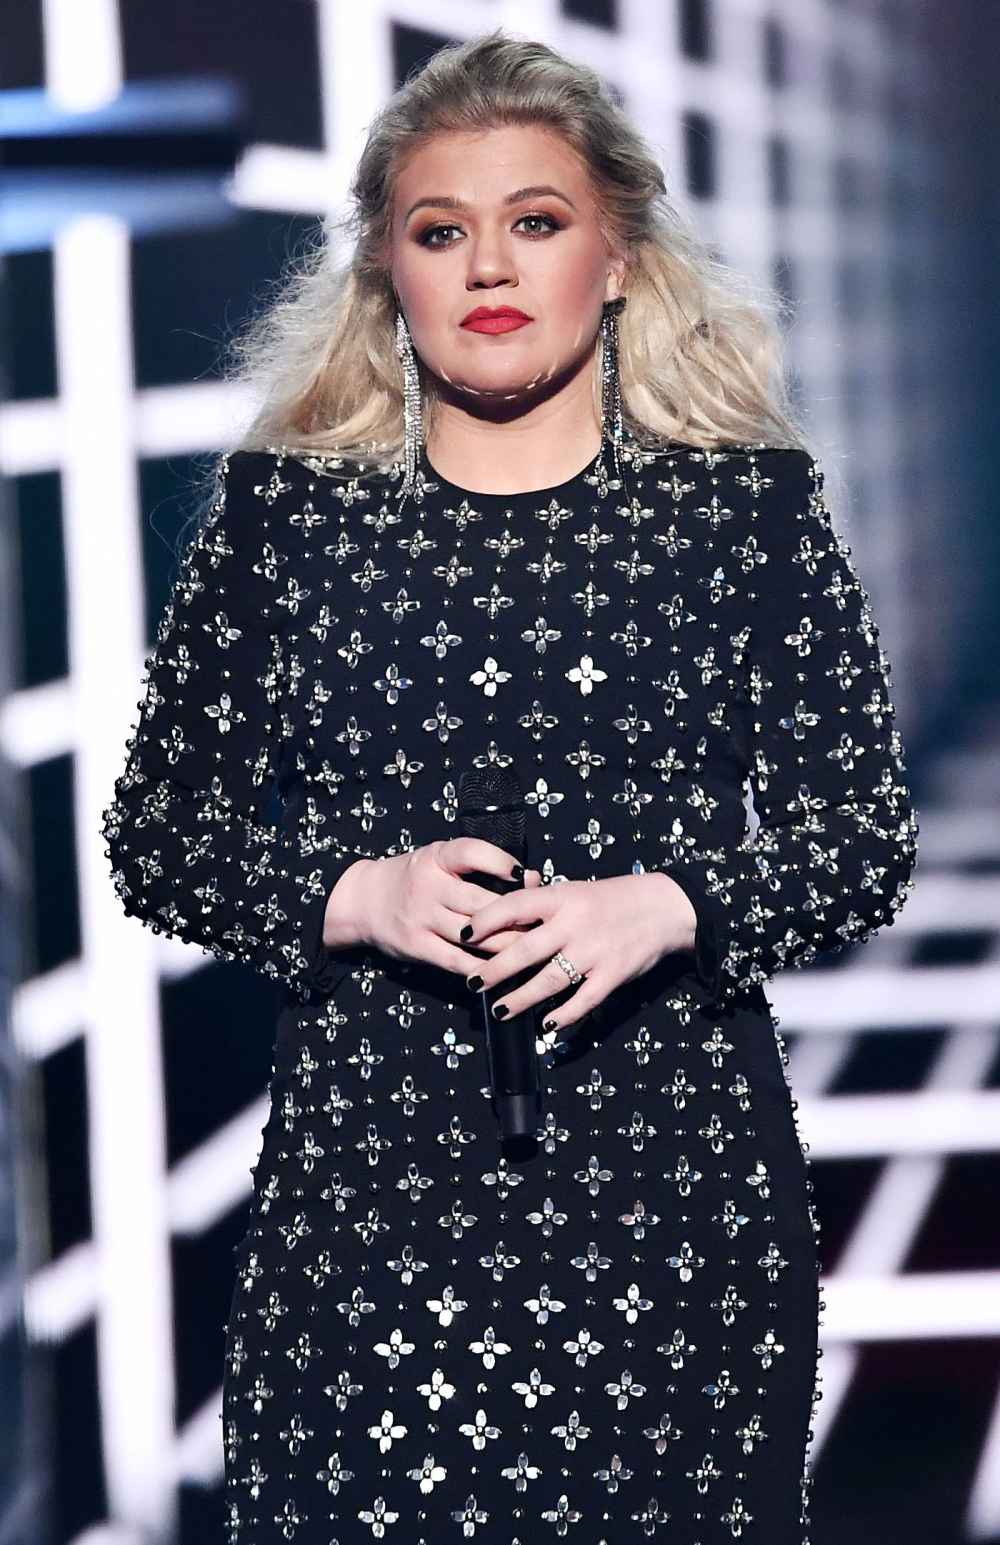 Kelly Clarkson Calls Out Police Looters Taking Advantage Protests